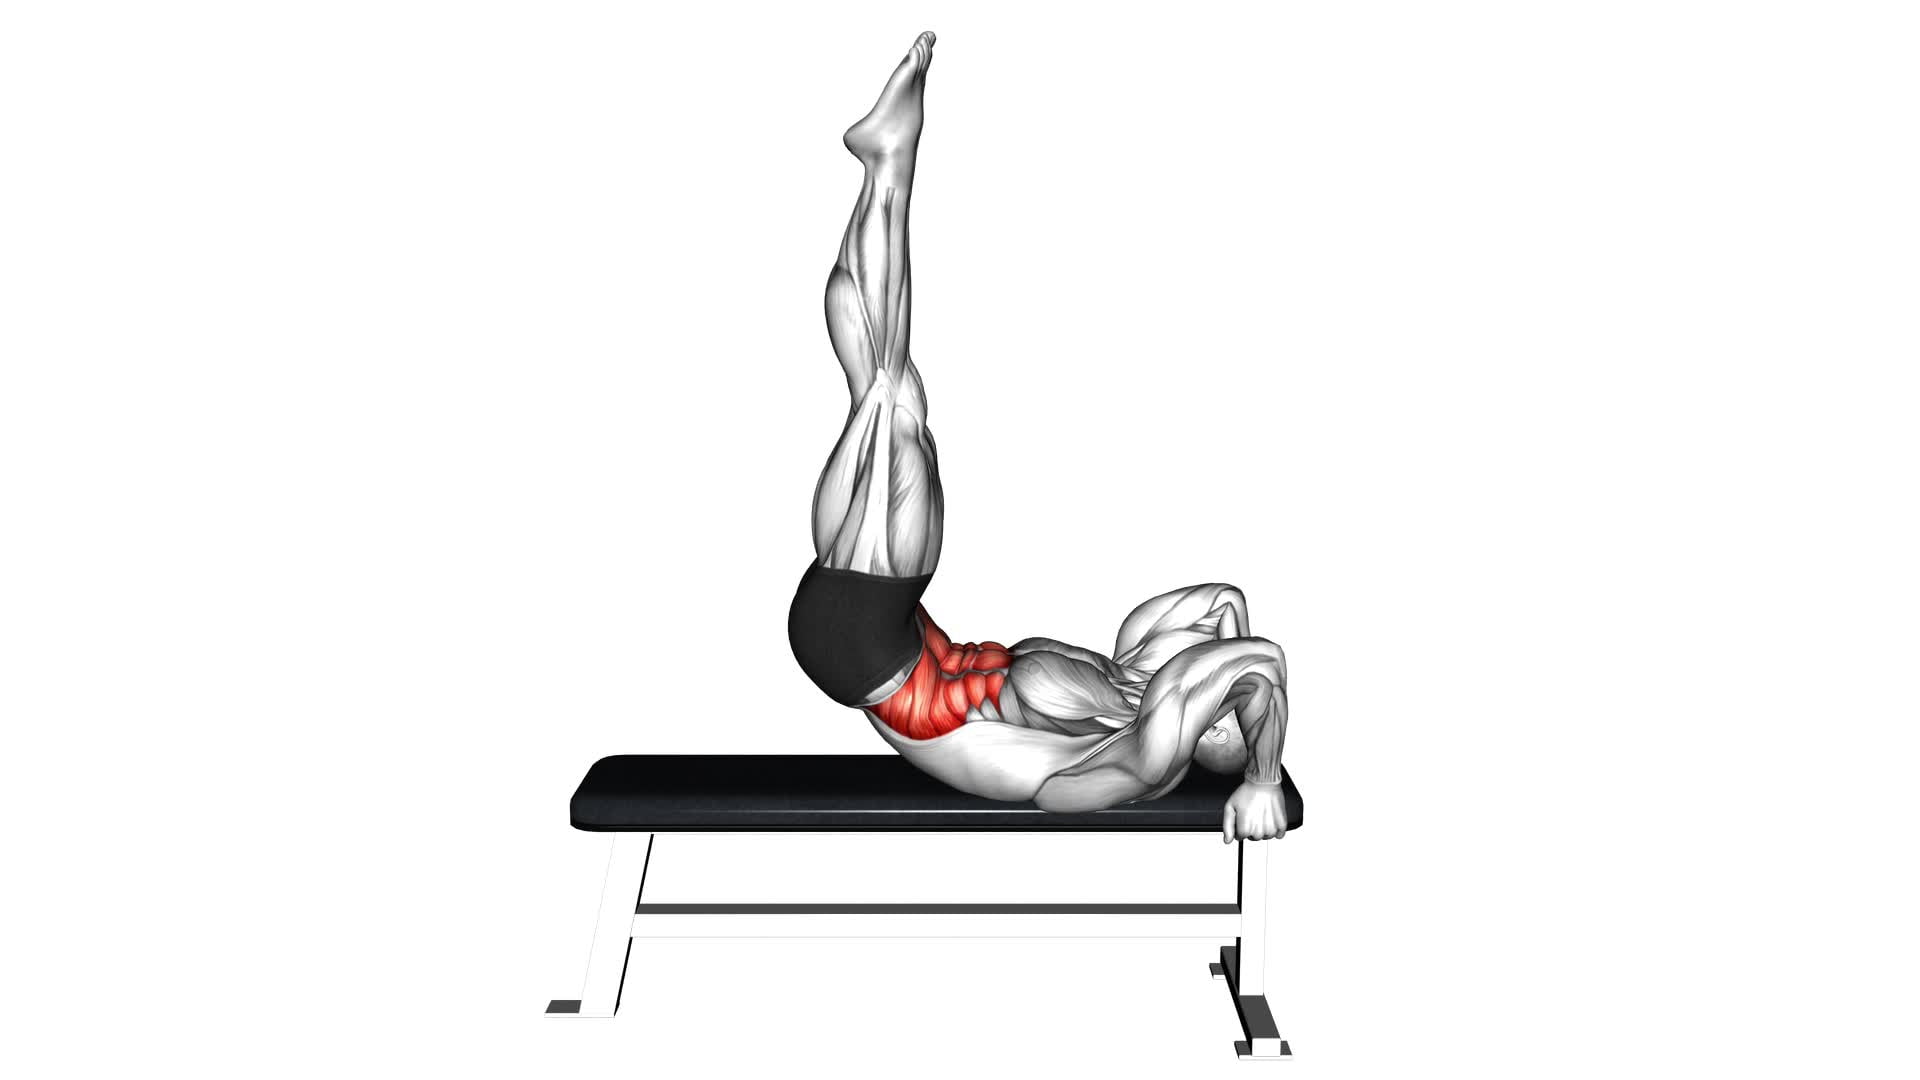 Lying Flat Hip Raise (male) - Video Exercise Guide & Tips